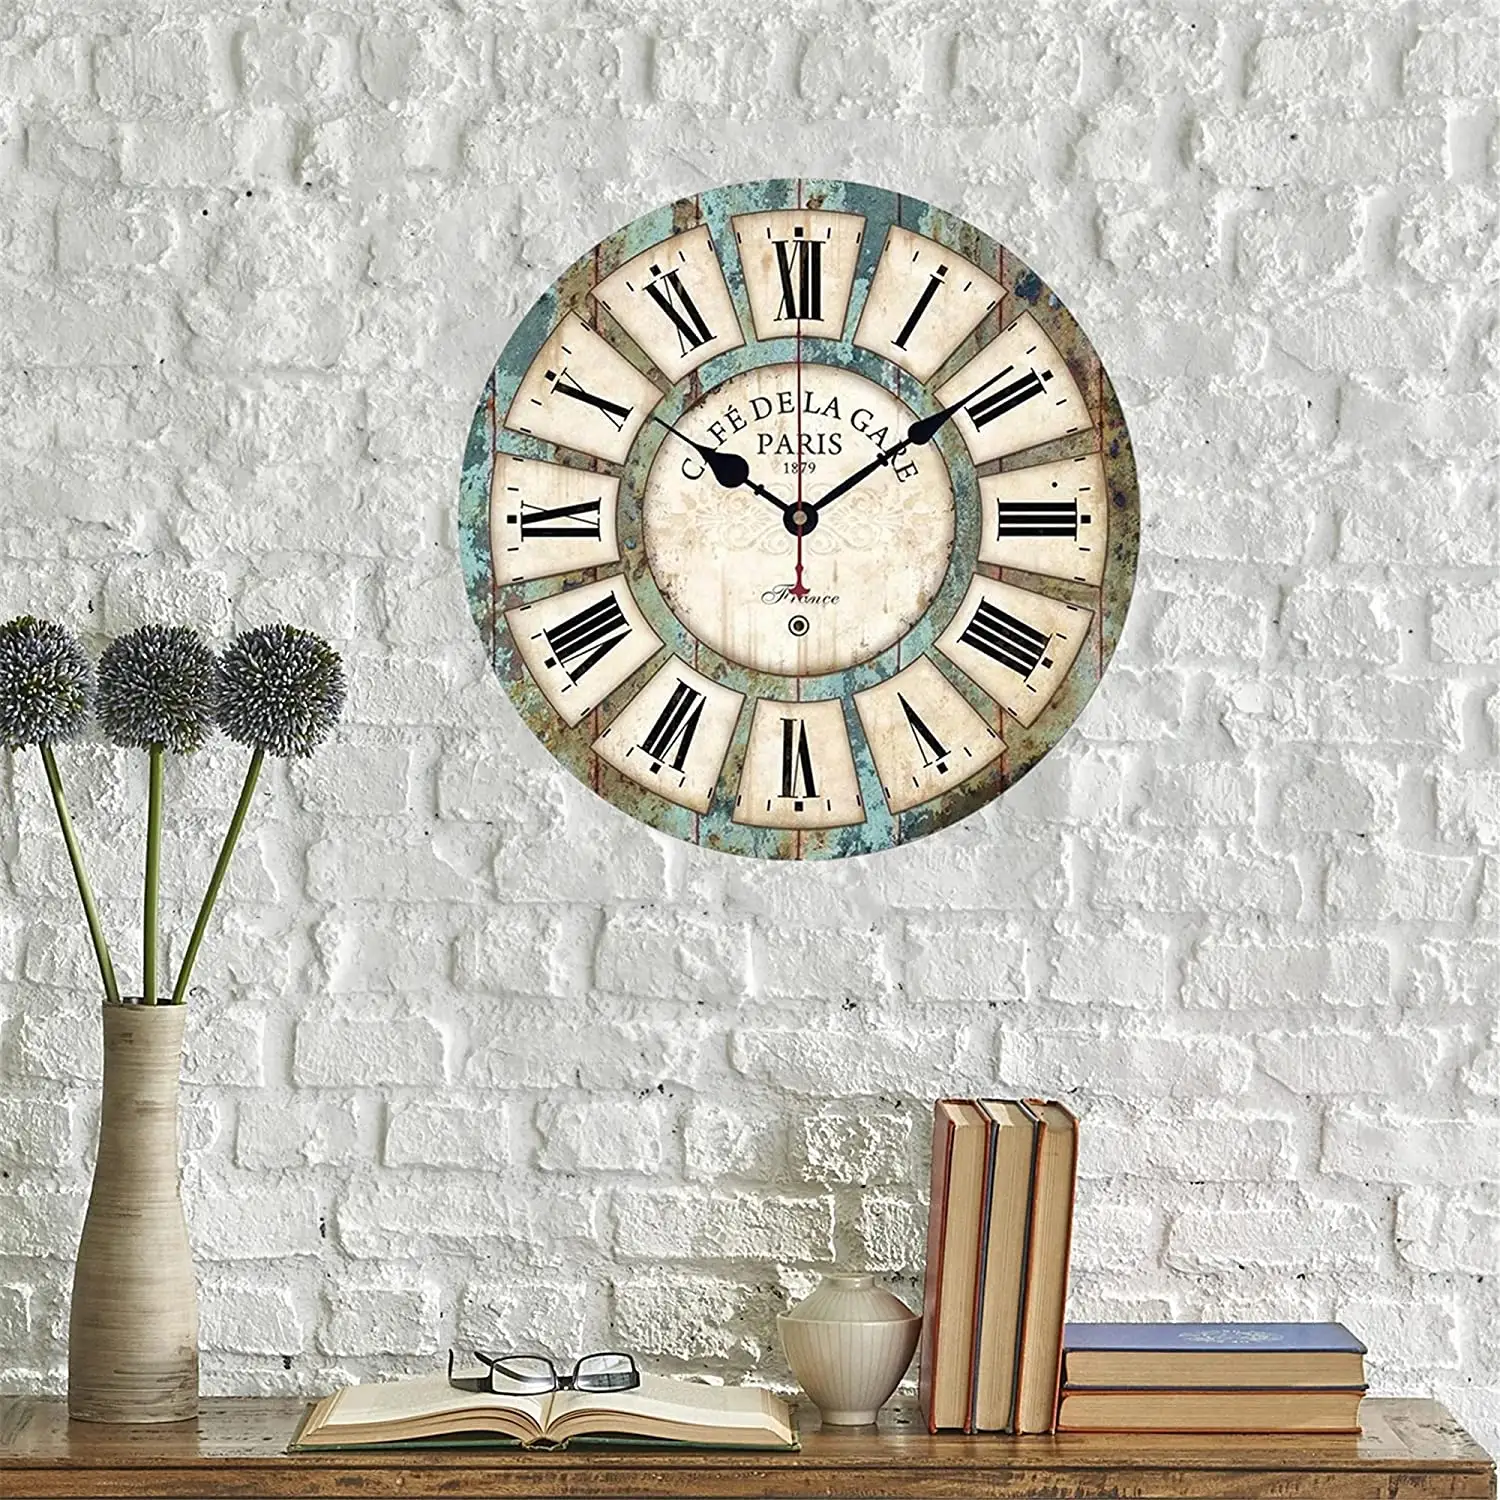 30.48cm Silent Round Wooden Wall Clock Rustic Style Battery Powered Vintage Farmhouse Walls Decorate Living Room Kitchen Bed